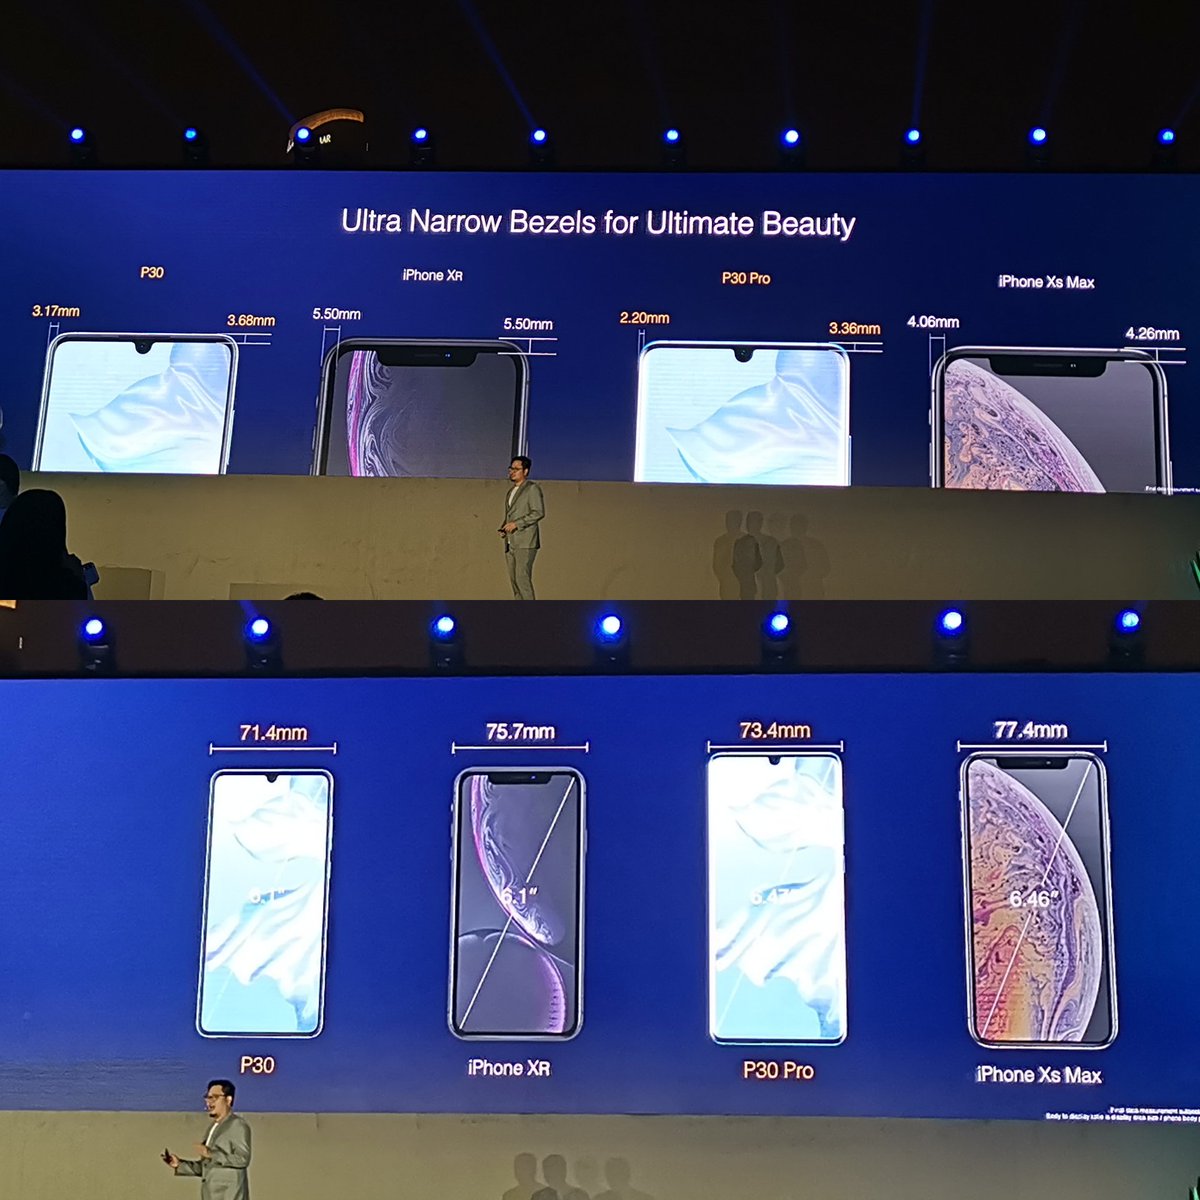 Huawei P30 and P30 Pro